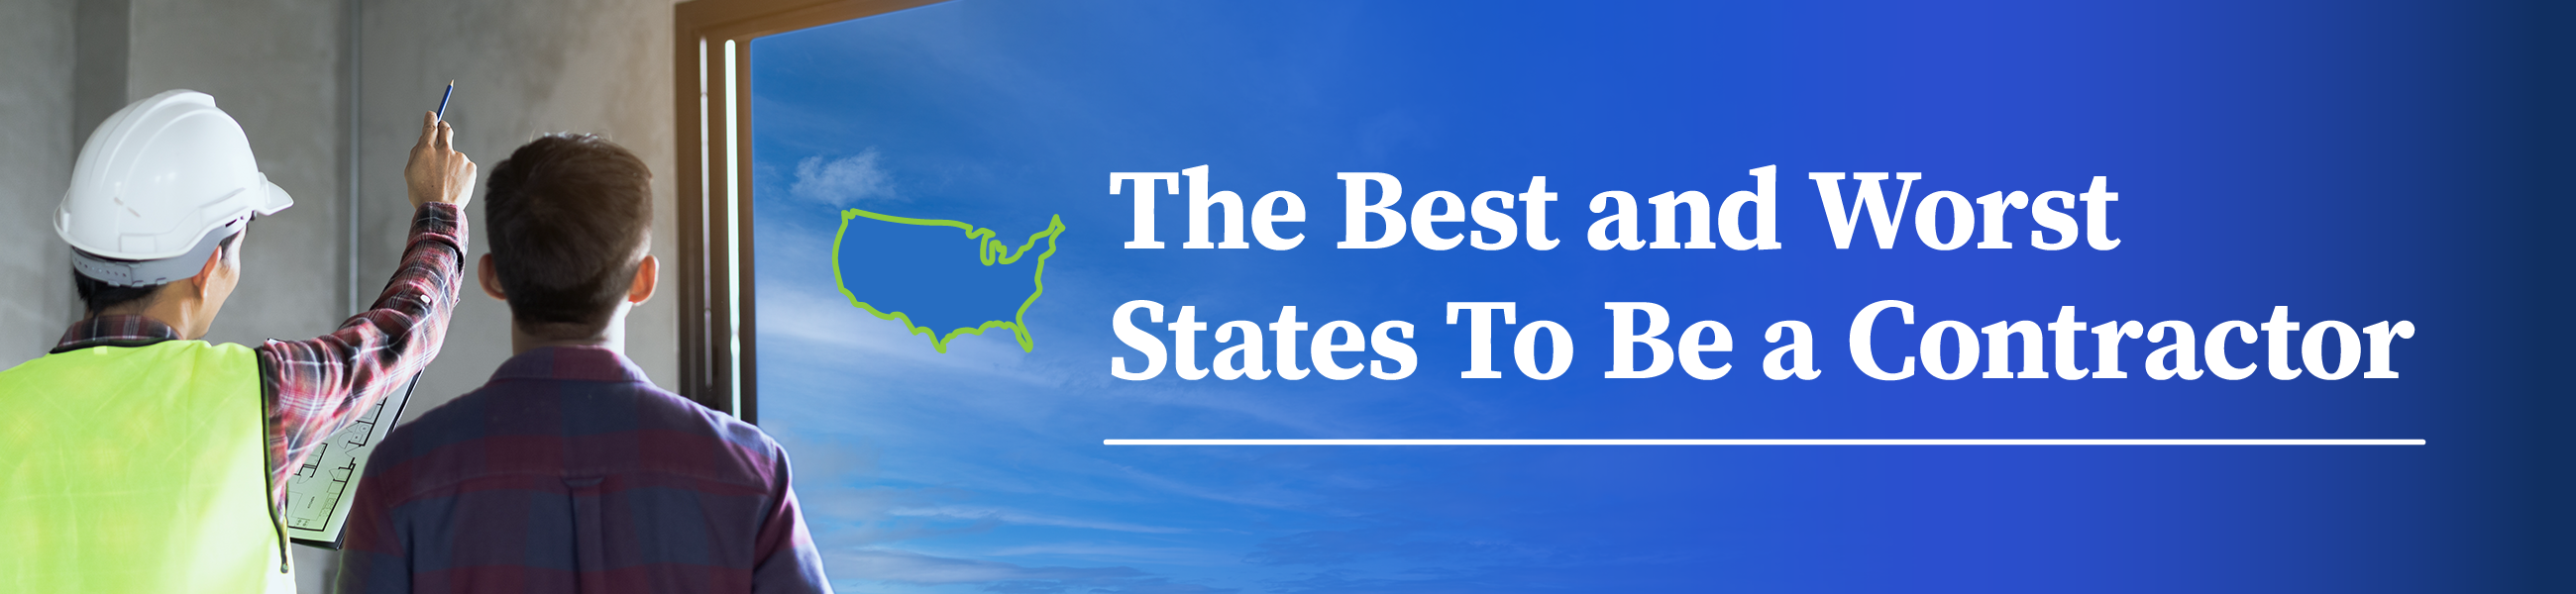 The Best and Worst States for Contractors